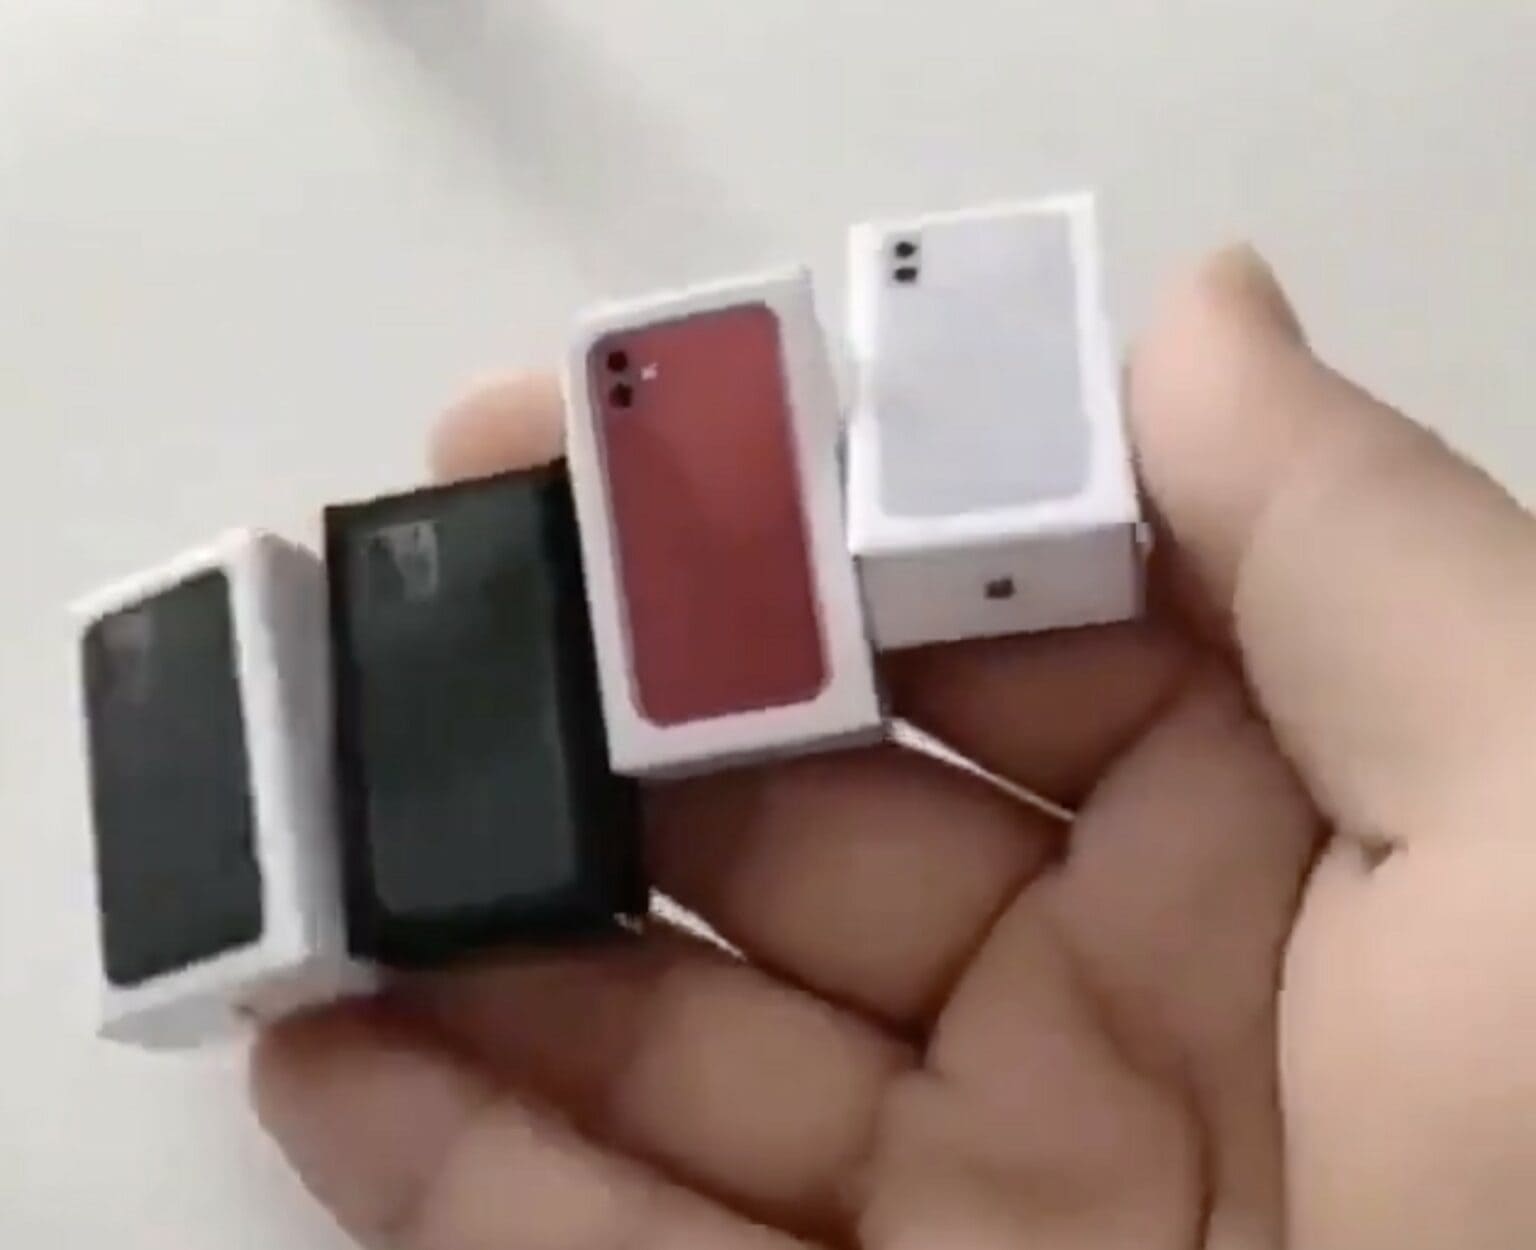 Joke unboxing shows just how 'mini' the iPhone 12 mini could have been